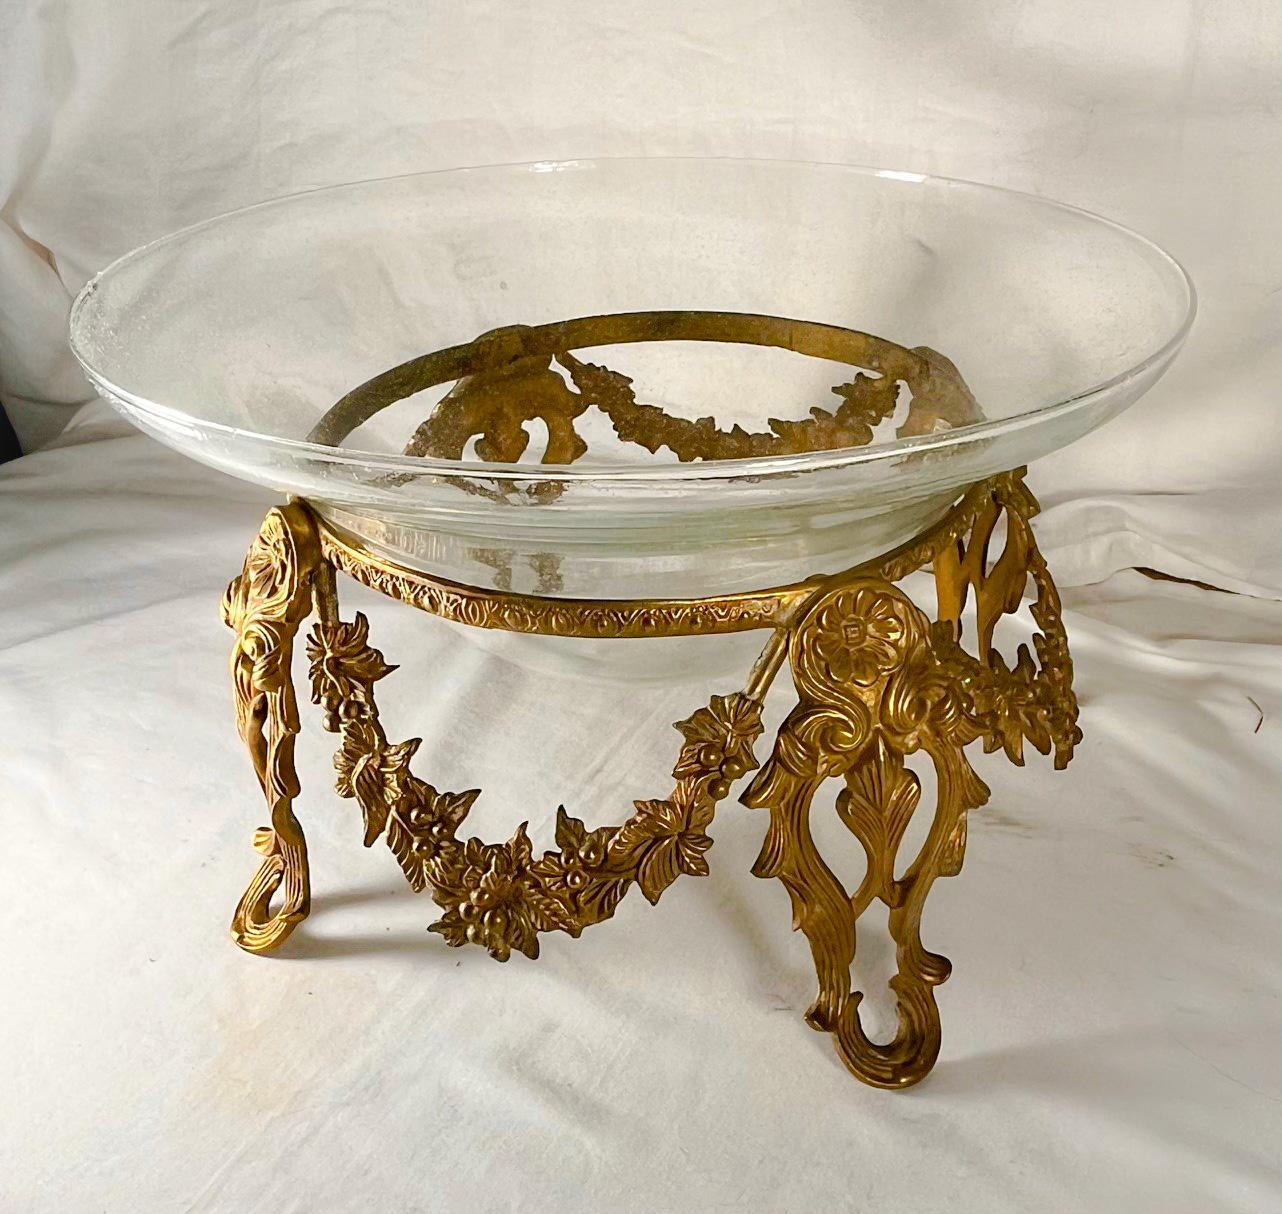 20th Century Vintage Large Art Glass Bowl Tazza Centerpiece Bowl in Brass Stand For Sale